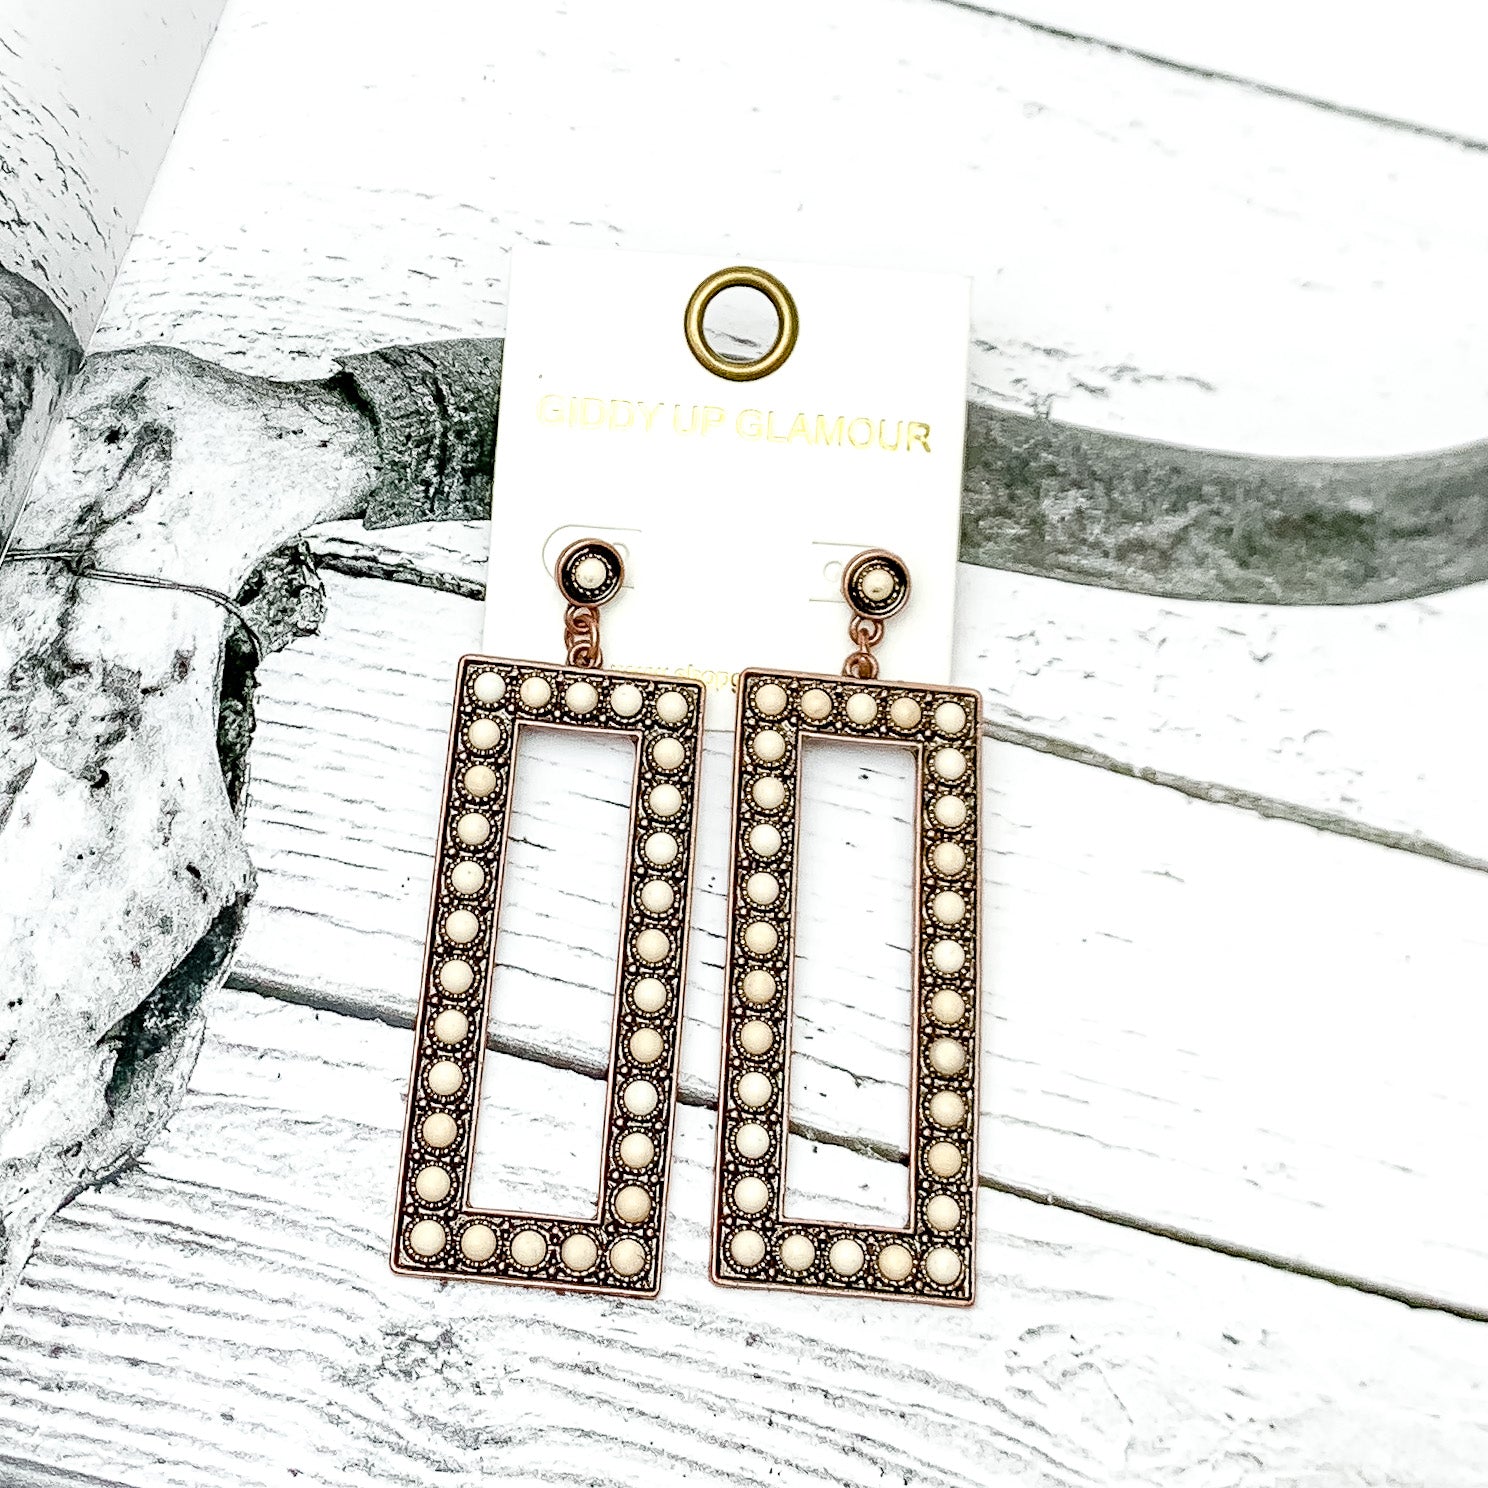 Copper Tone Rectangular Drop Earrings With Stones in Ivory. Pictured on an open page with a western background.